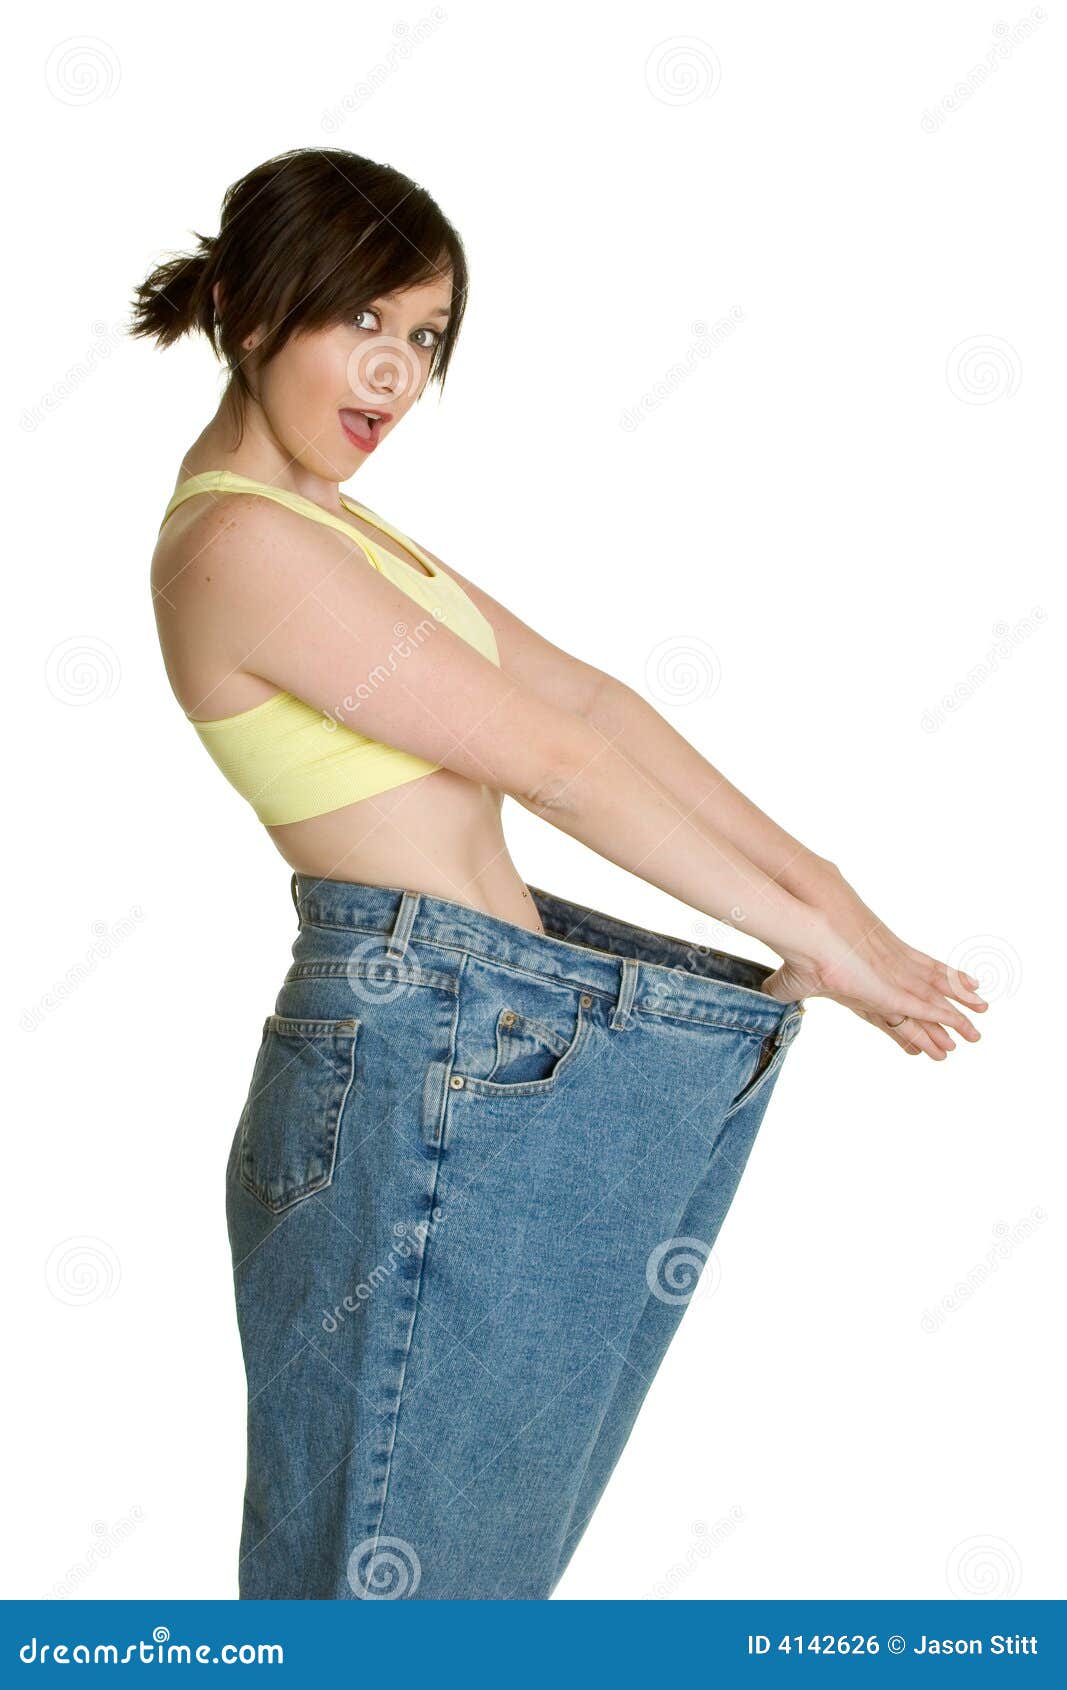 Overweight Fat Woman Image & Photo (Free Trial)